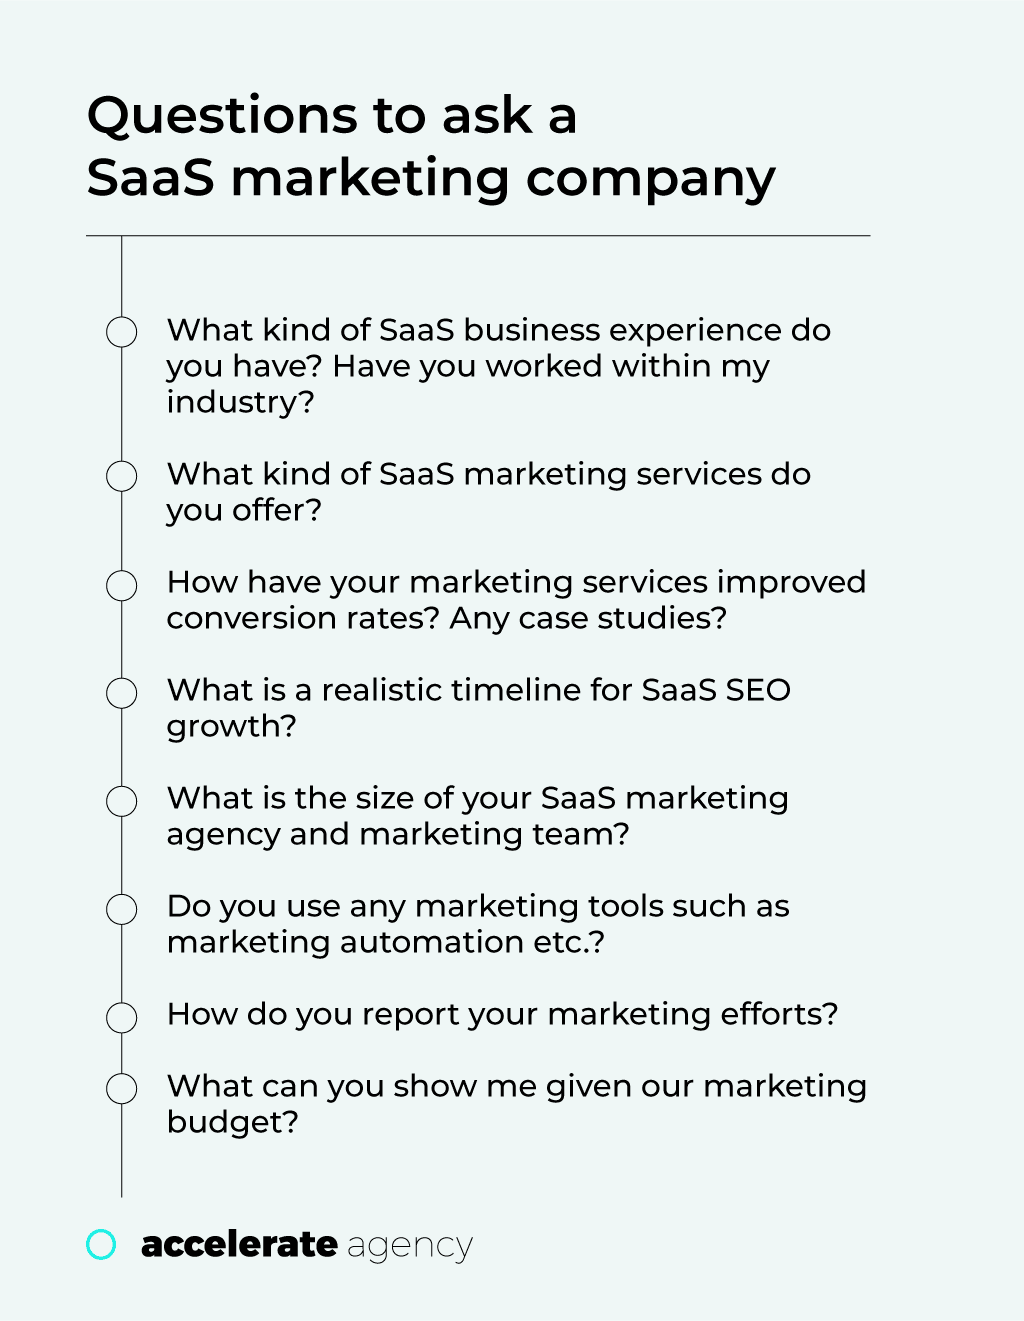 Questions to ask a SaaS marketing company